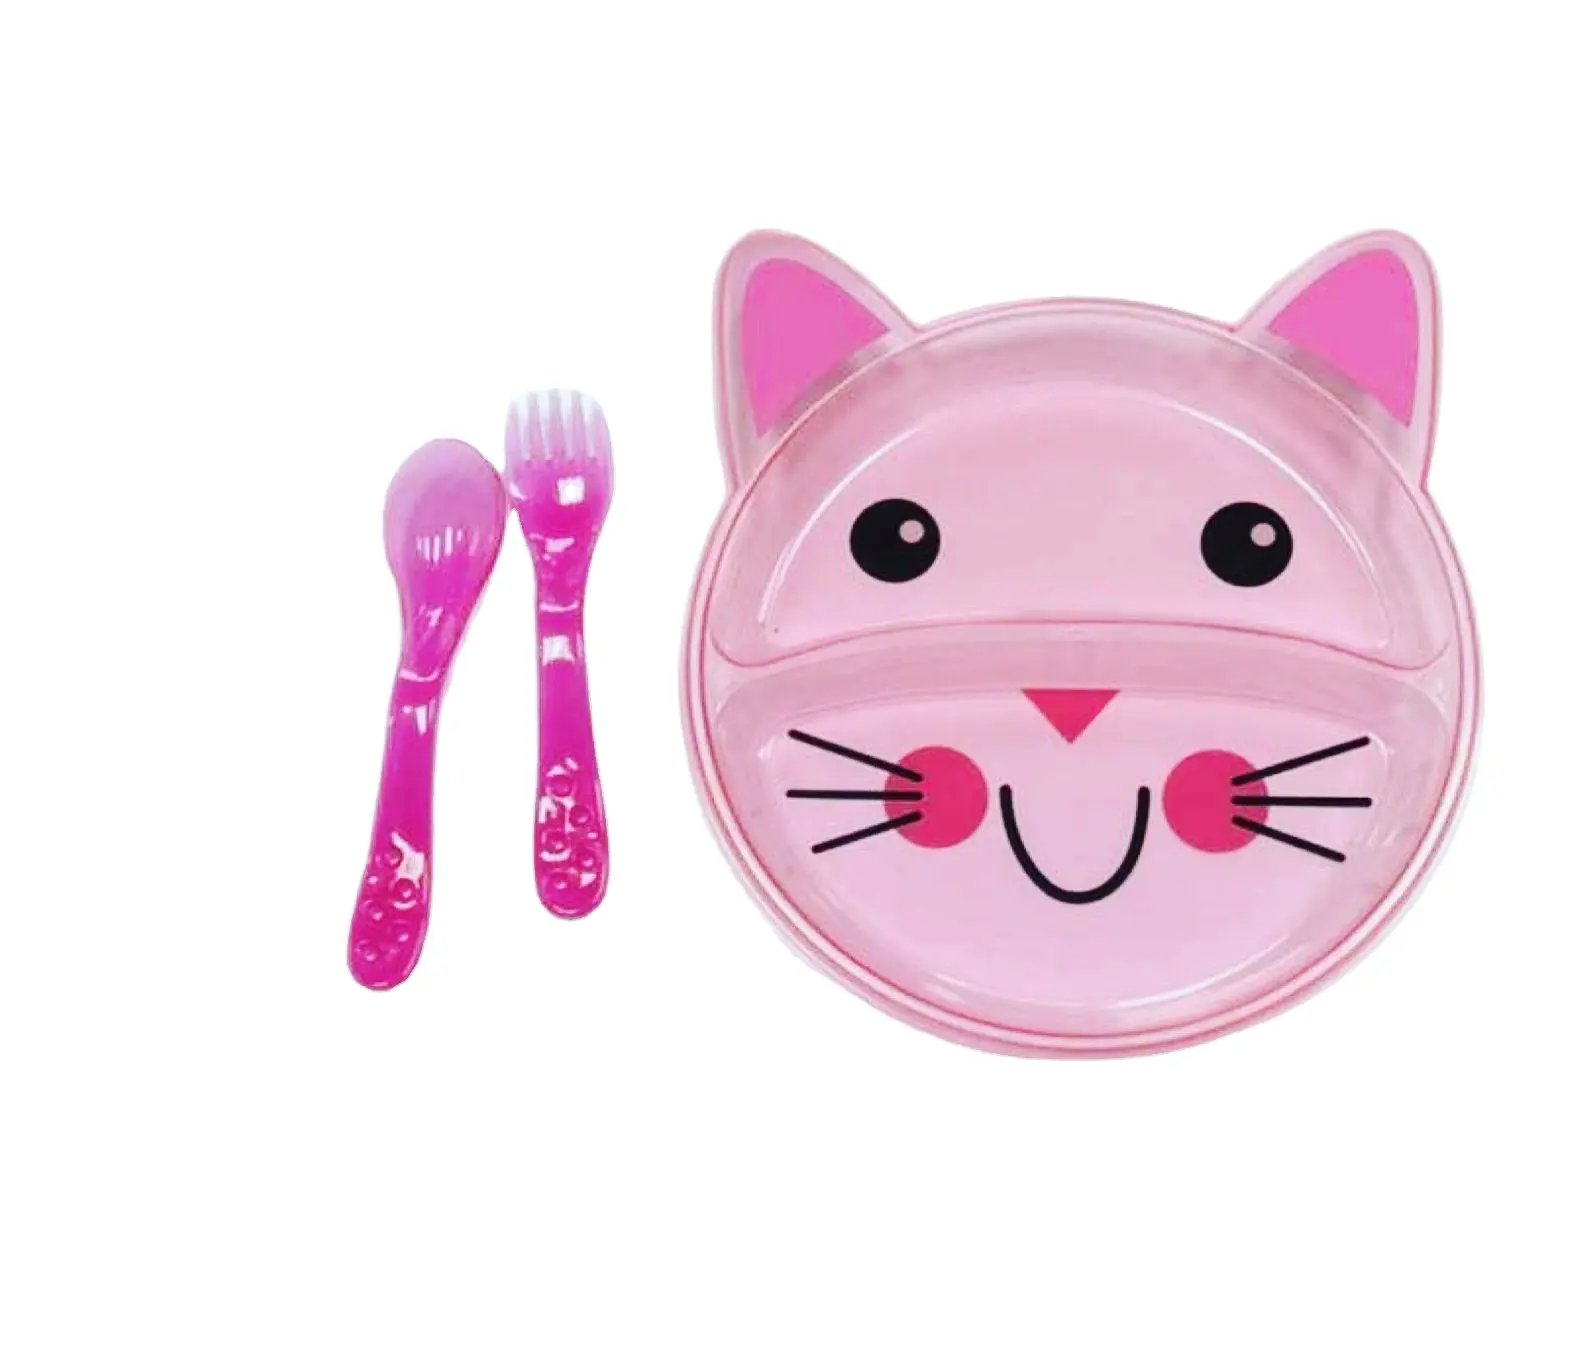 Cheap lovely kid tableware plastic cartoon cat design plate with spoon and fork